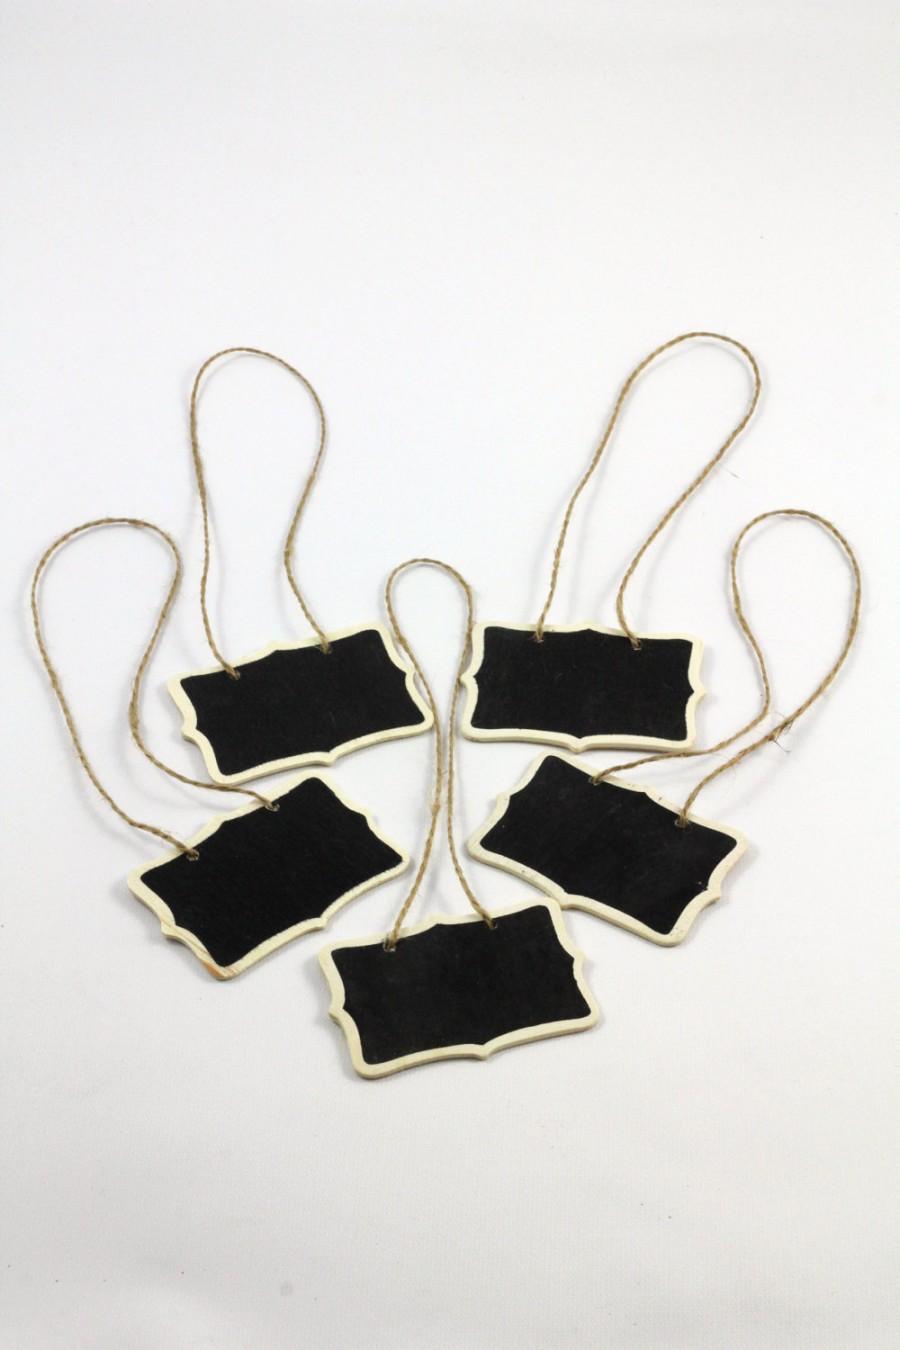 Mariage - SALE - Set of 5  - Mini Chalkboard Hanging Tags - Cottage Chic - Package embellishment  - Gift Tags Favor Tags - DearSeed